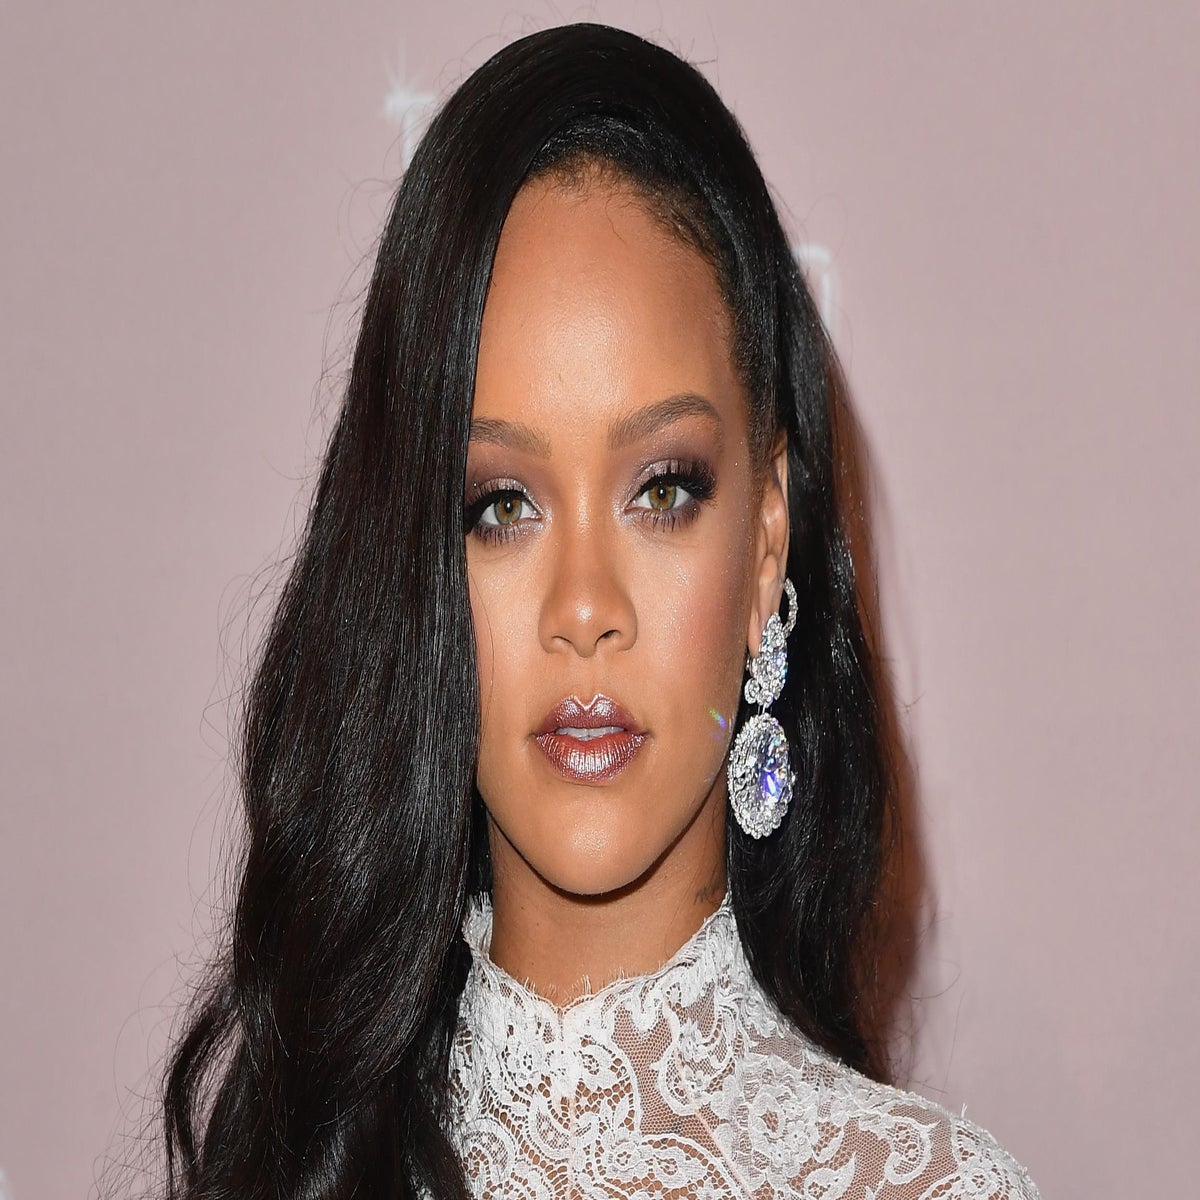 Everything We Know About Rihanna's Luxury Fashion Brand for LVMH